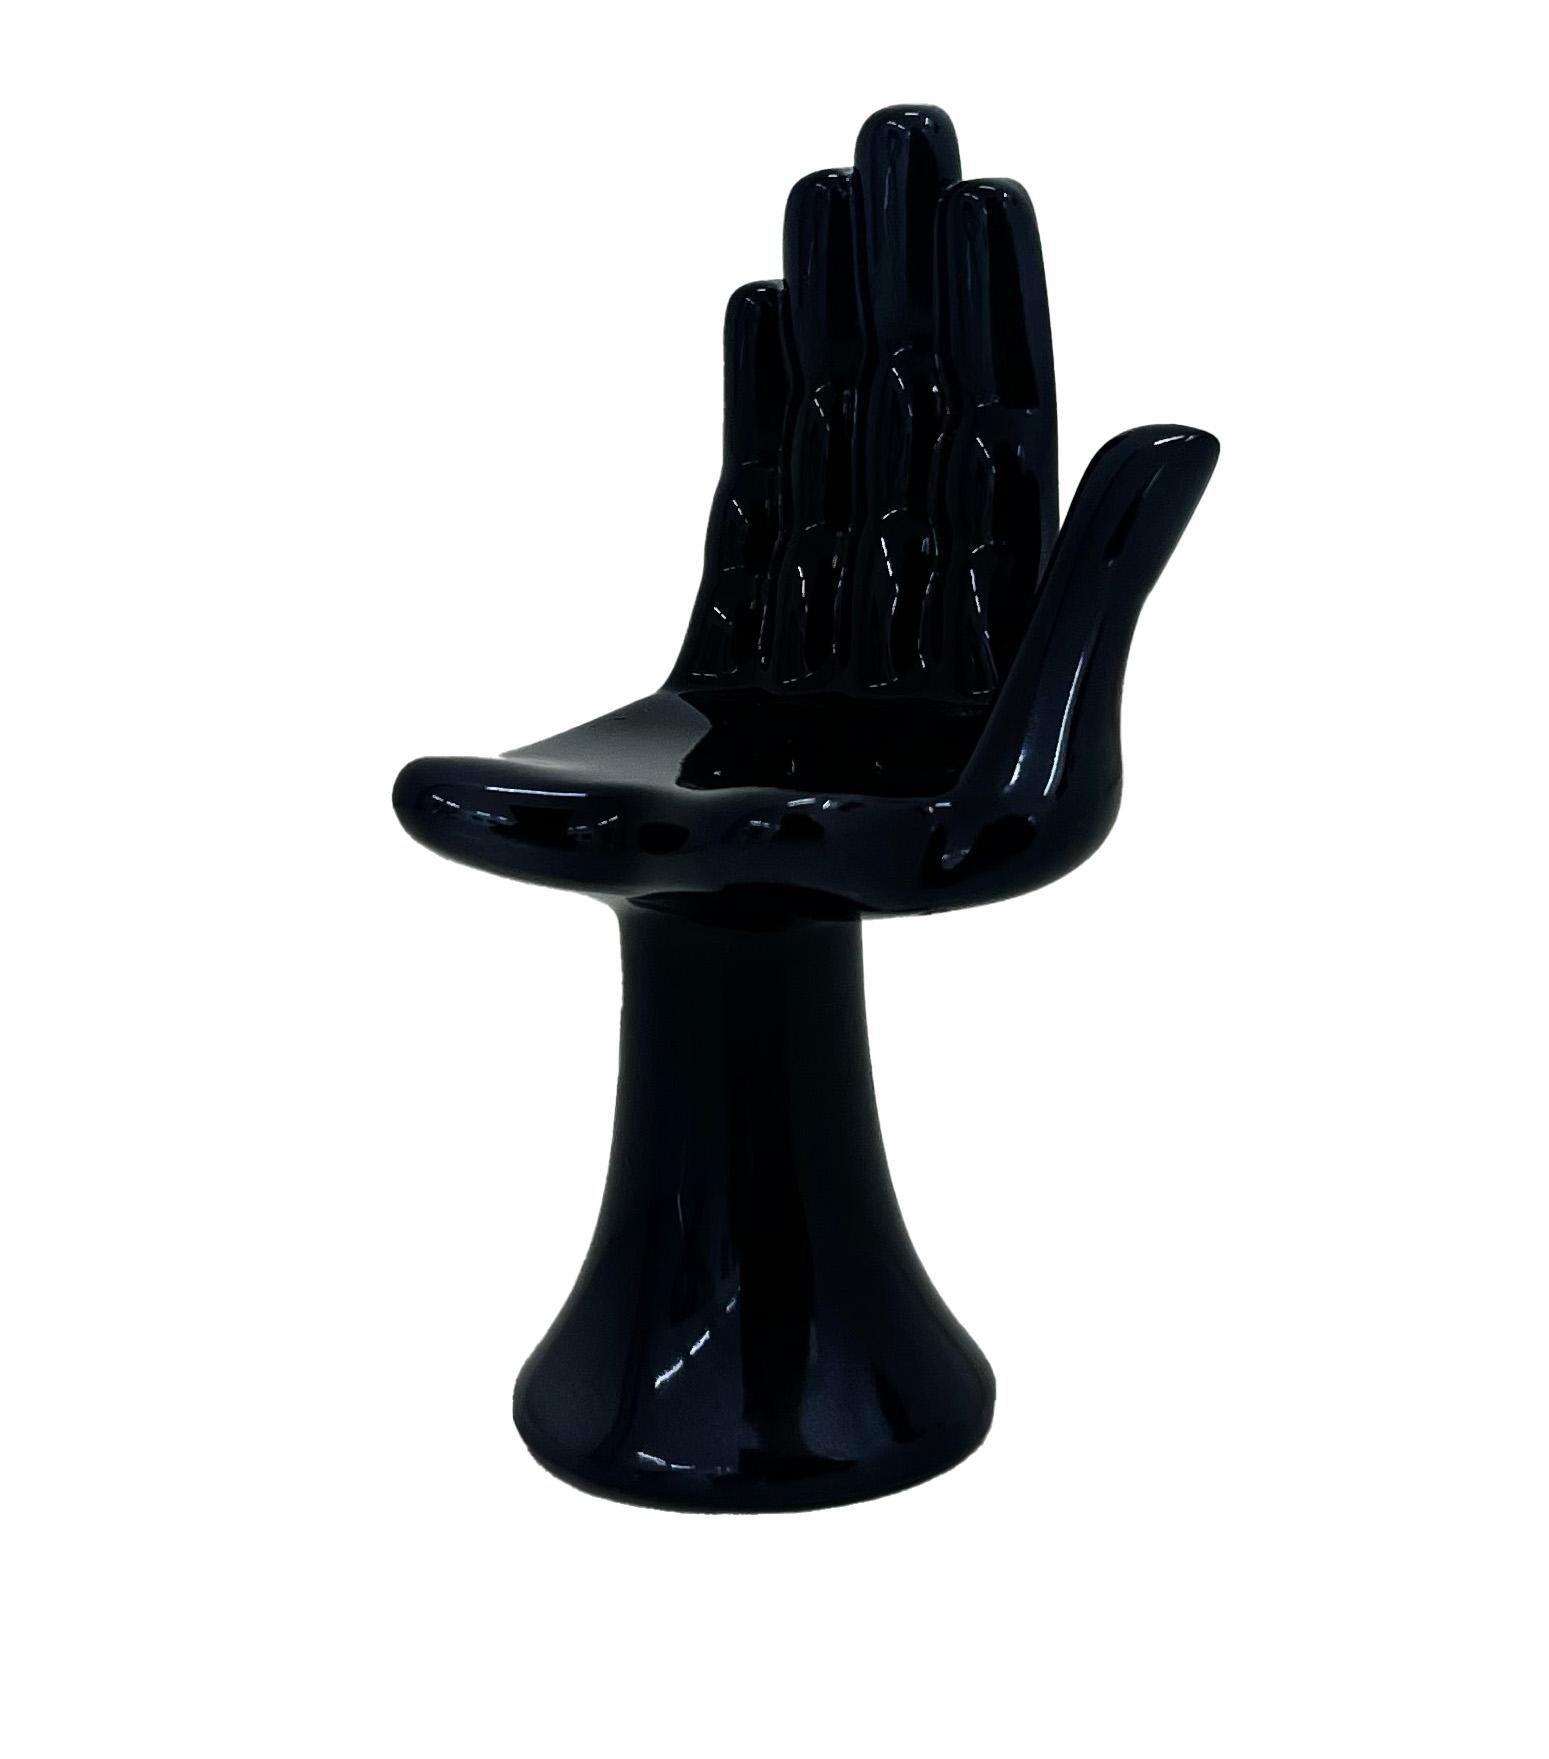 "Mano" - Mini version of Hand Chair by Friedeberg, sculpture, colored, black